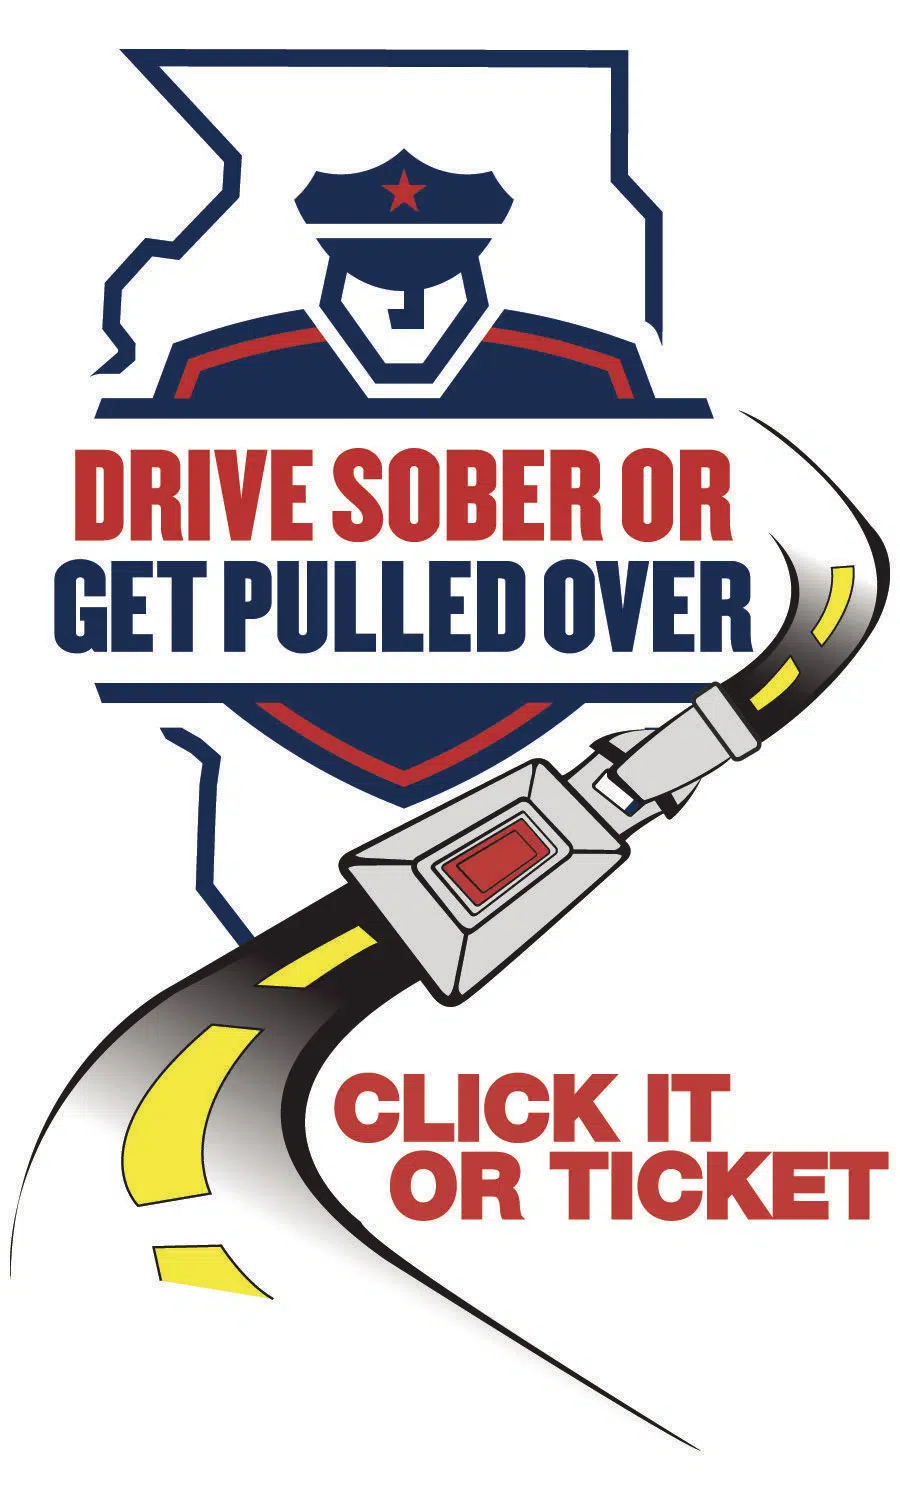 Decatur Police Wrote 53 Seat Belt Citations during Click It or Ticket Campaign